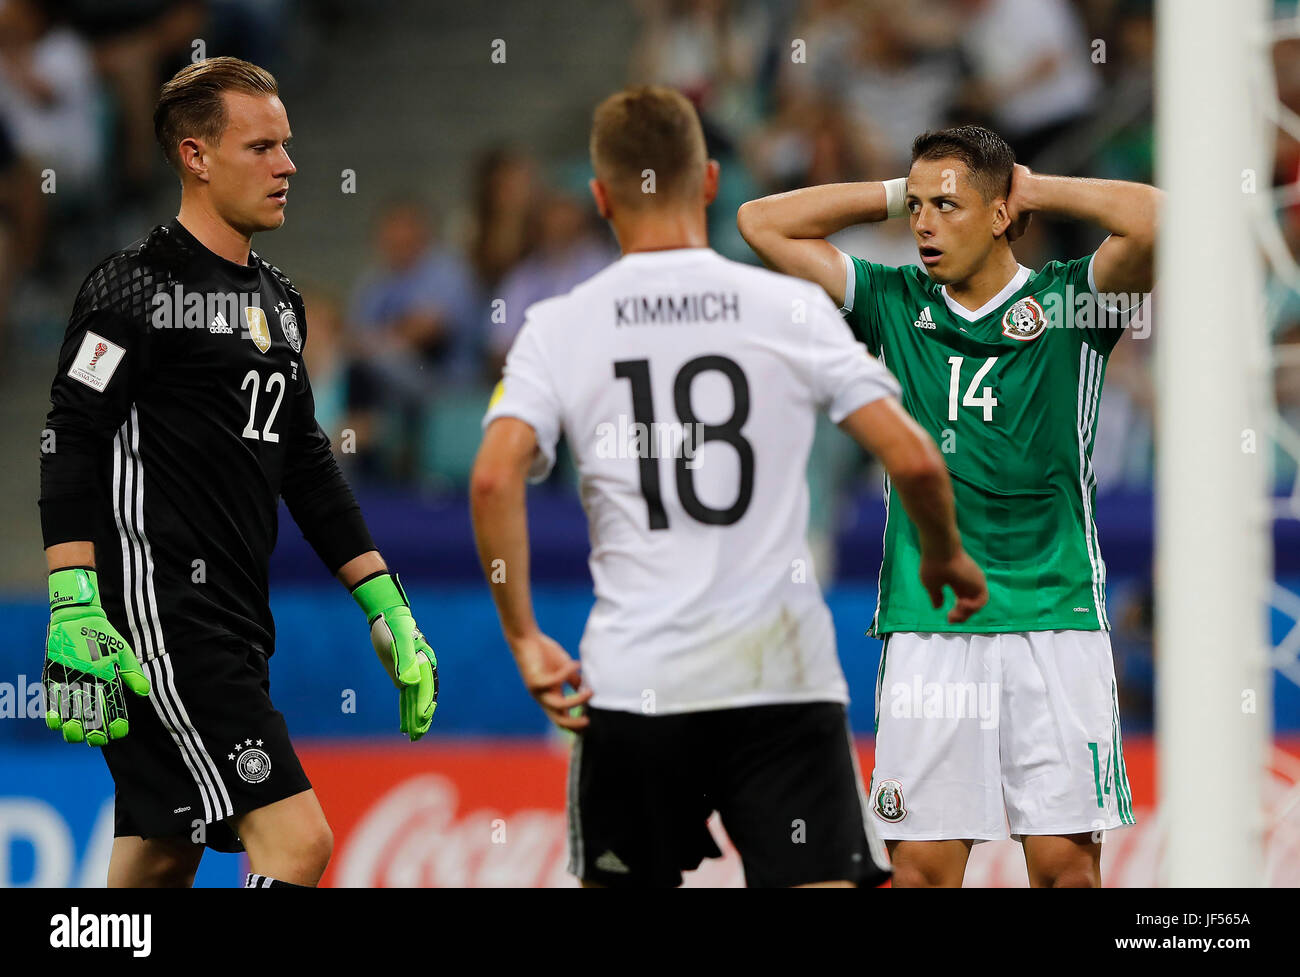 SOCHI, SC - 29.06.2017: GERMANY VS MEXICO - HERNANDEZ Javier de México regrets bid ahead of Marc-Andre TER STEGEN and Joshua KIMMICH of Germany during a match between Germany and Mexico valid for the semifinals of the Confederations Cup 2017, held on Thursday (29), held at the Sochi Olympic Stadium in Sochi, Russia. (Photo: Rodolfo Buhrer/La Imagem/Fotoarena) Stock Photo